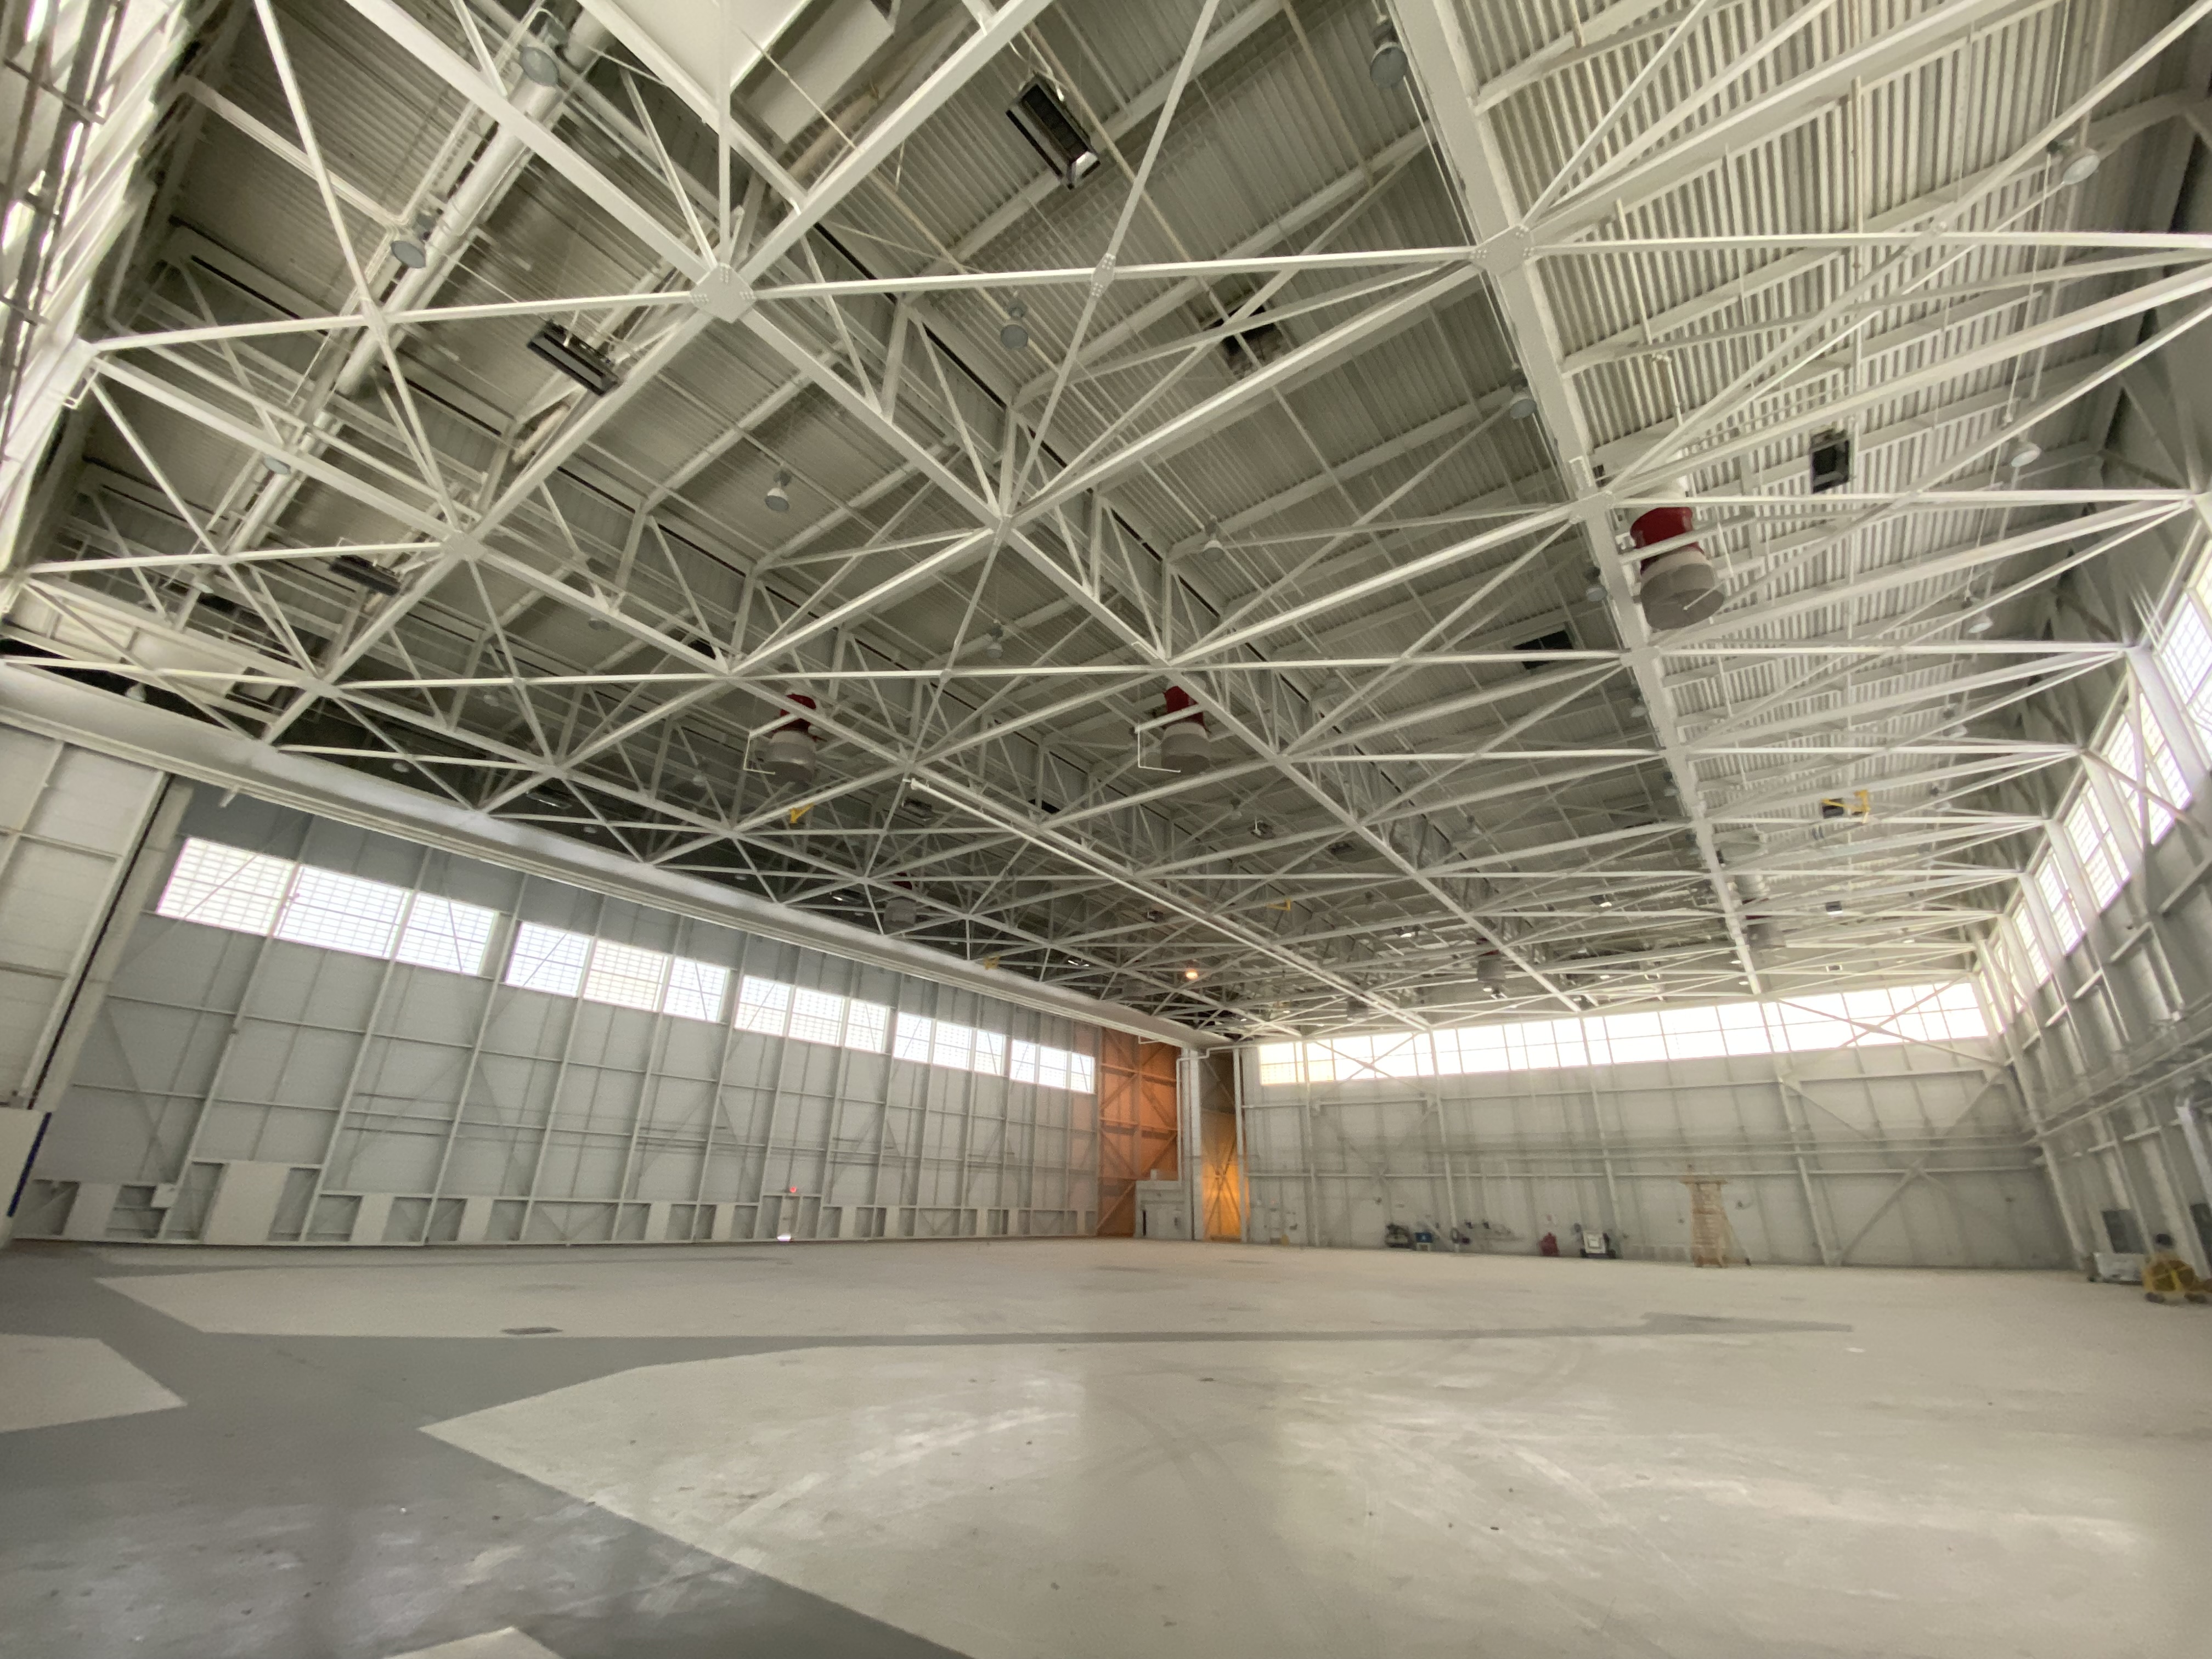 The facility will serve as a large aircraft maintenance hangar with offices and warehousing for the Spirit Technical Operations team when it begins its first phase of operations.  